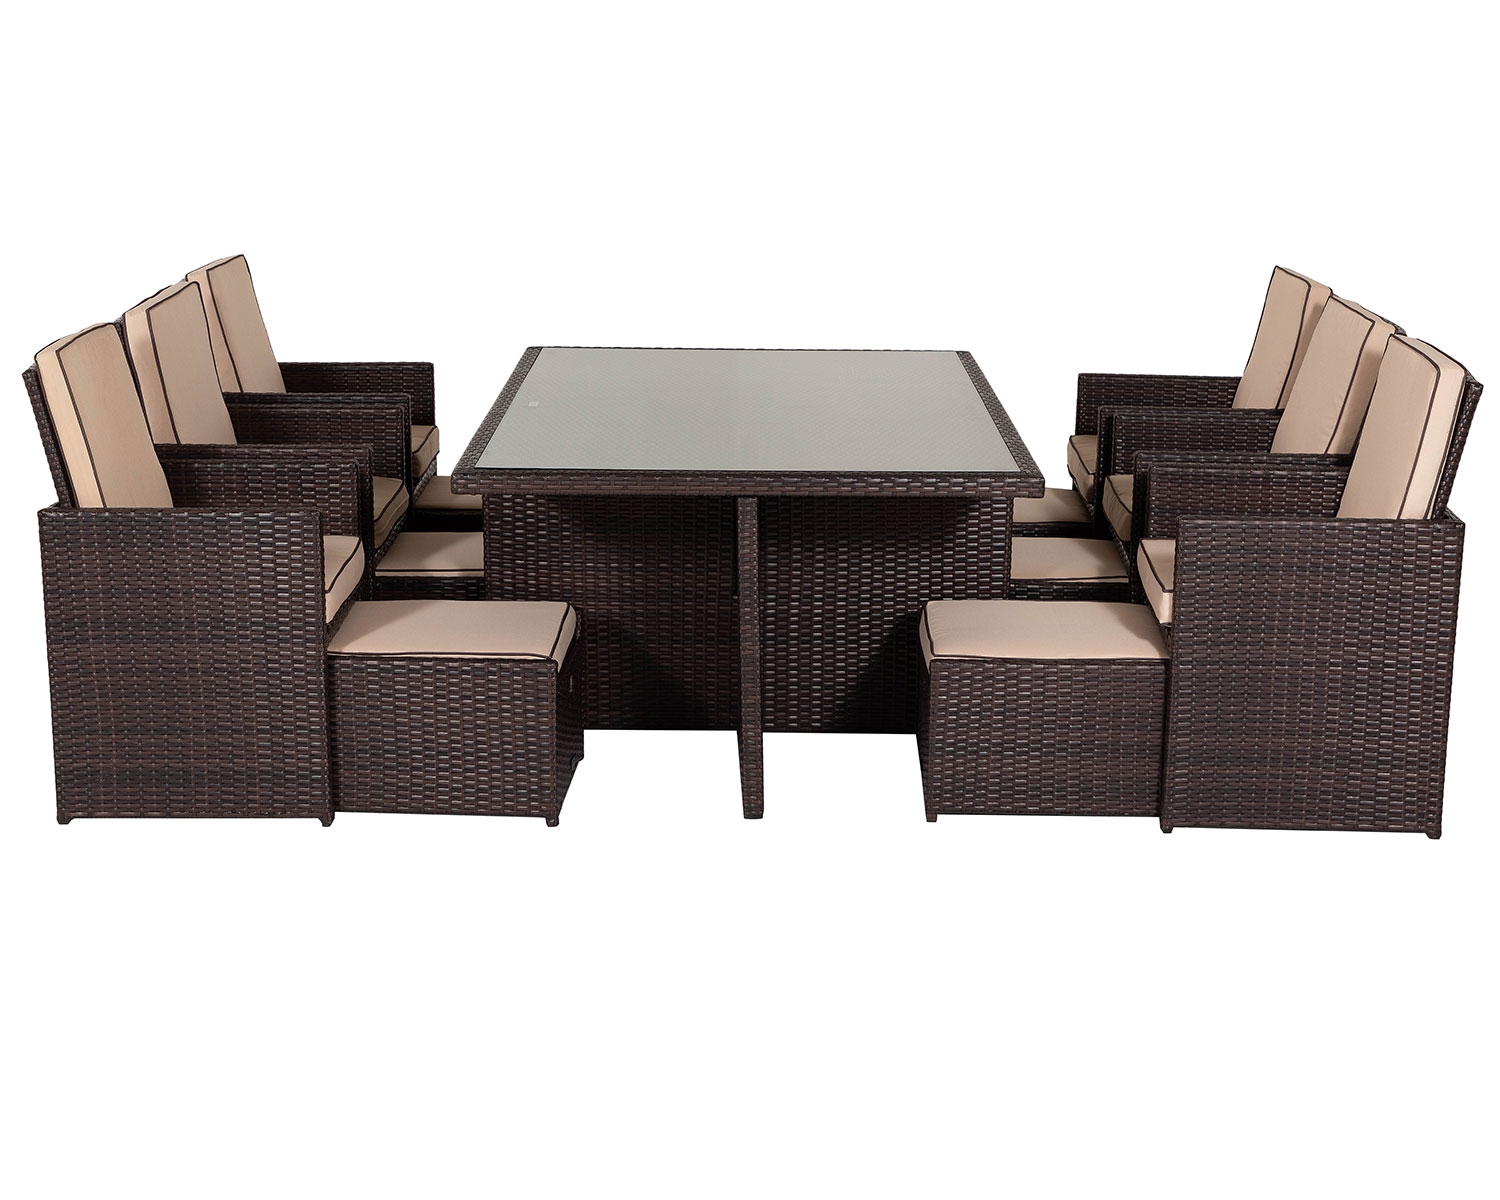 6 Seat Rattan Garden Cube Dining Set in Brown with Footstools